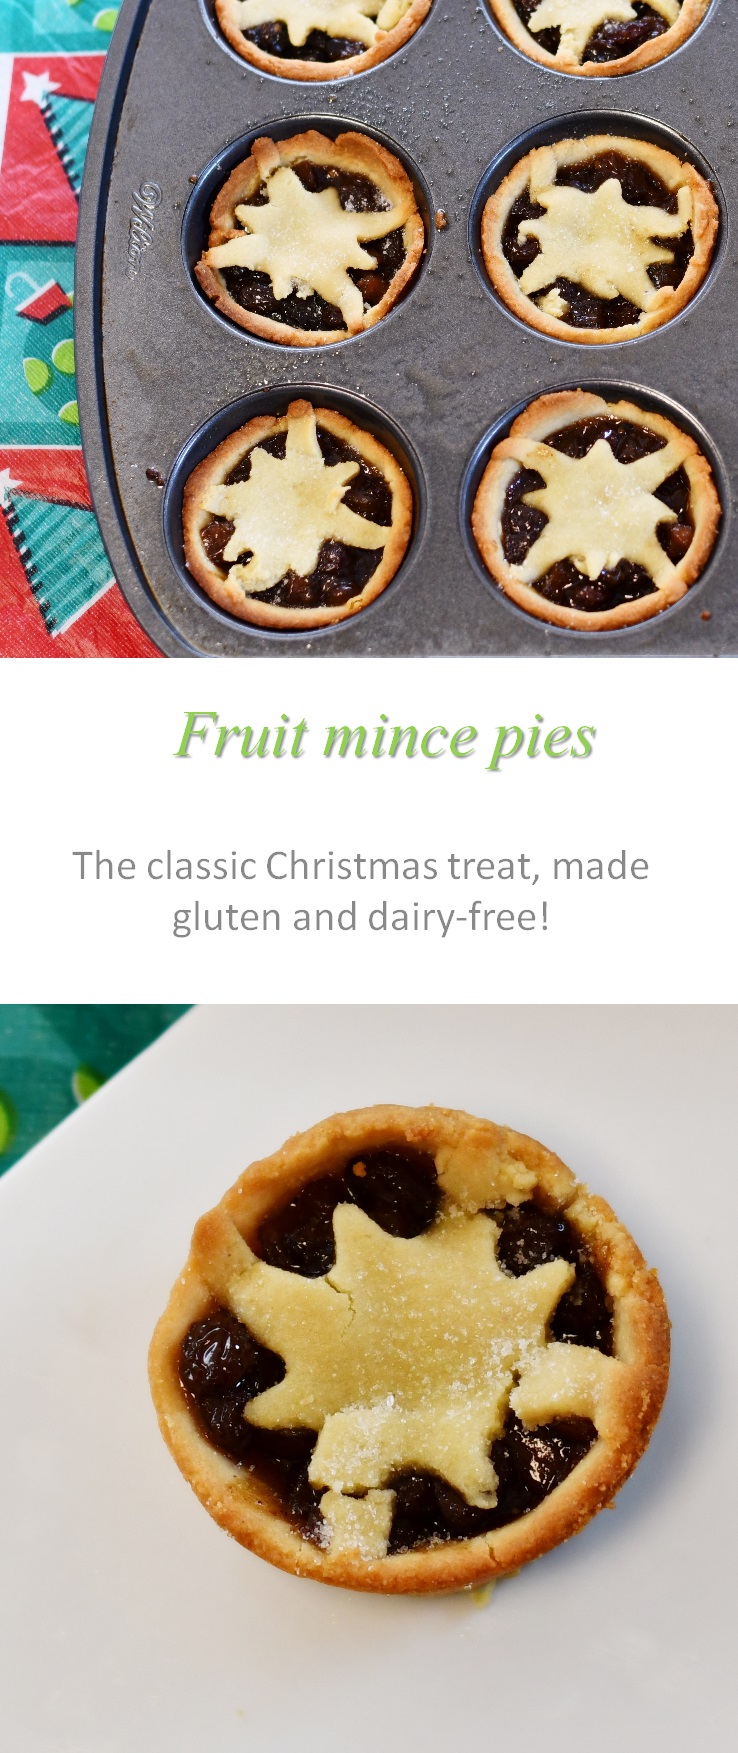 A fruity filling and a gluten-free pastry base for fruit mince pies. A little crumbly, but well worth the effort, especially at Christmas-time! #mincepies